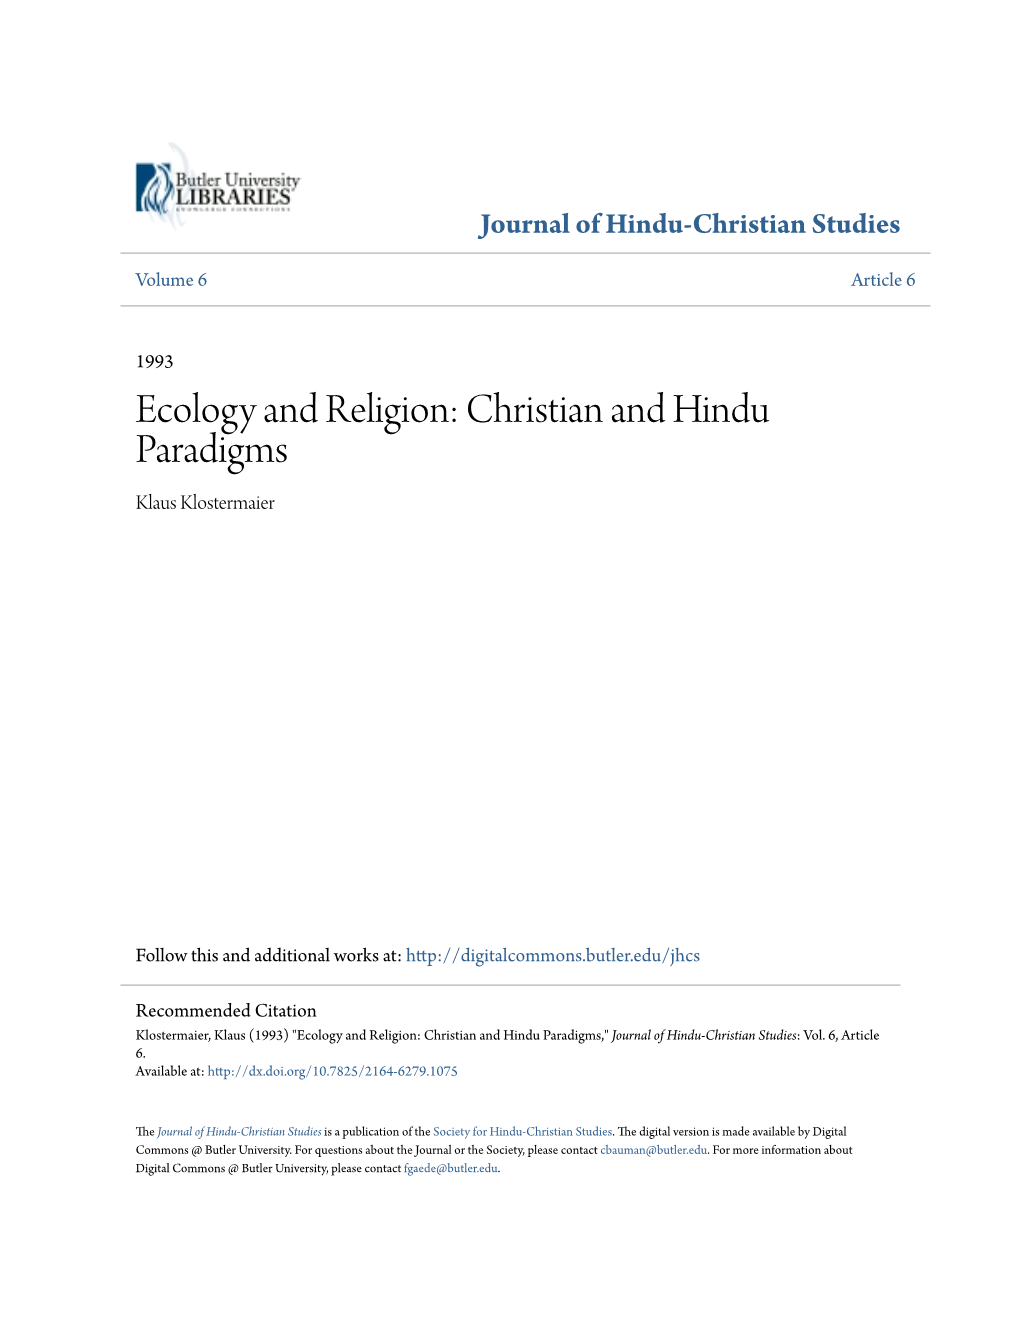 Ecology and Religion: Christian and Hindu Paradigms Klaus Klostermaier